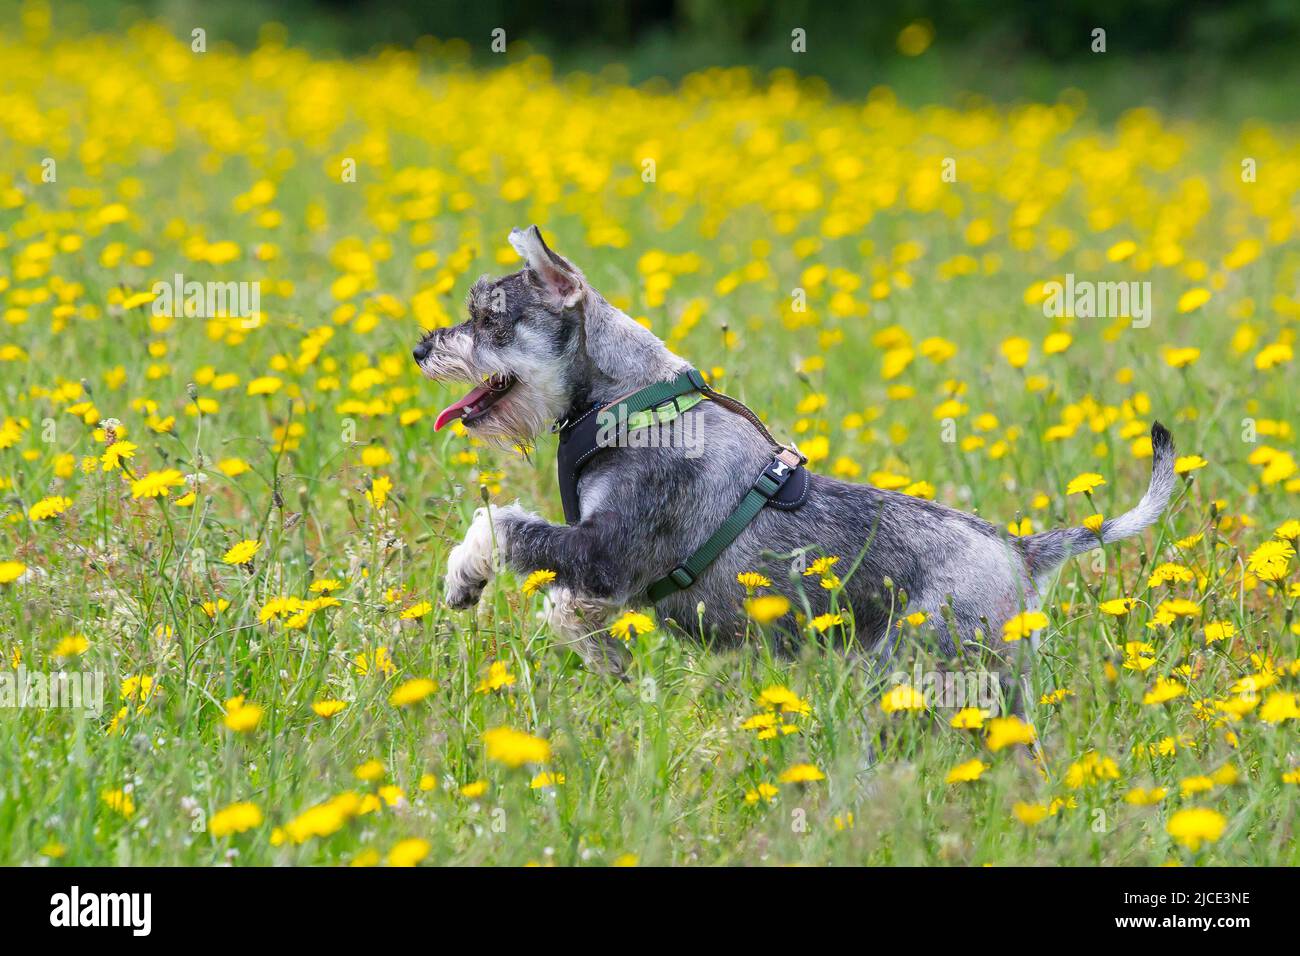 Kidderminster, UK. 12th June. 2022. UK weather: with lovely, warm temperatures and sunny conditions, today is a perfect day to play in the park. This young, pet Schnauzer dog is having so much fun as he races through the dandelion flowers in a country park. Credit: Lee Hudson/Alamy Live News Stock Photo